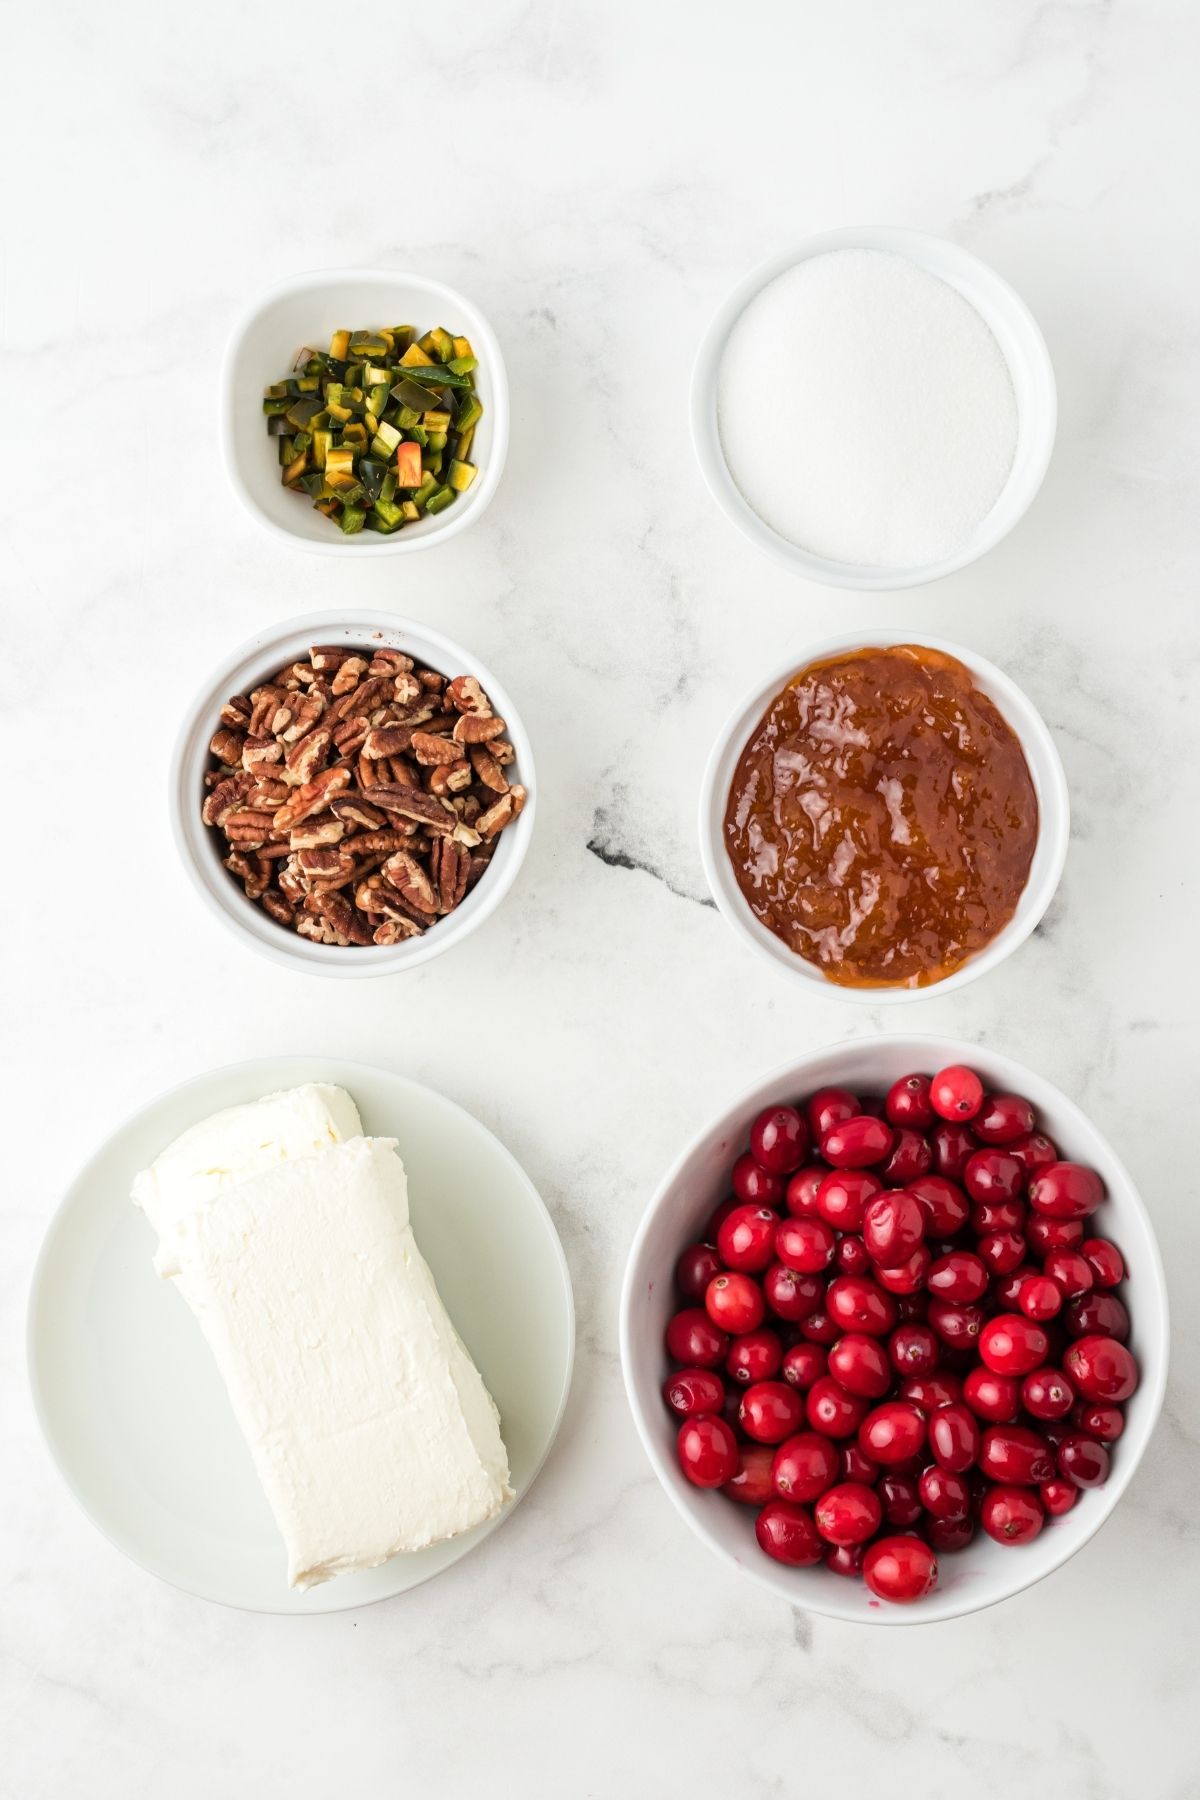 ingredients in bowls on white counter: chopped jalapenos, sugar, apricot jelly, chopped pecans, whole cranberries, block of cream cheese